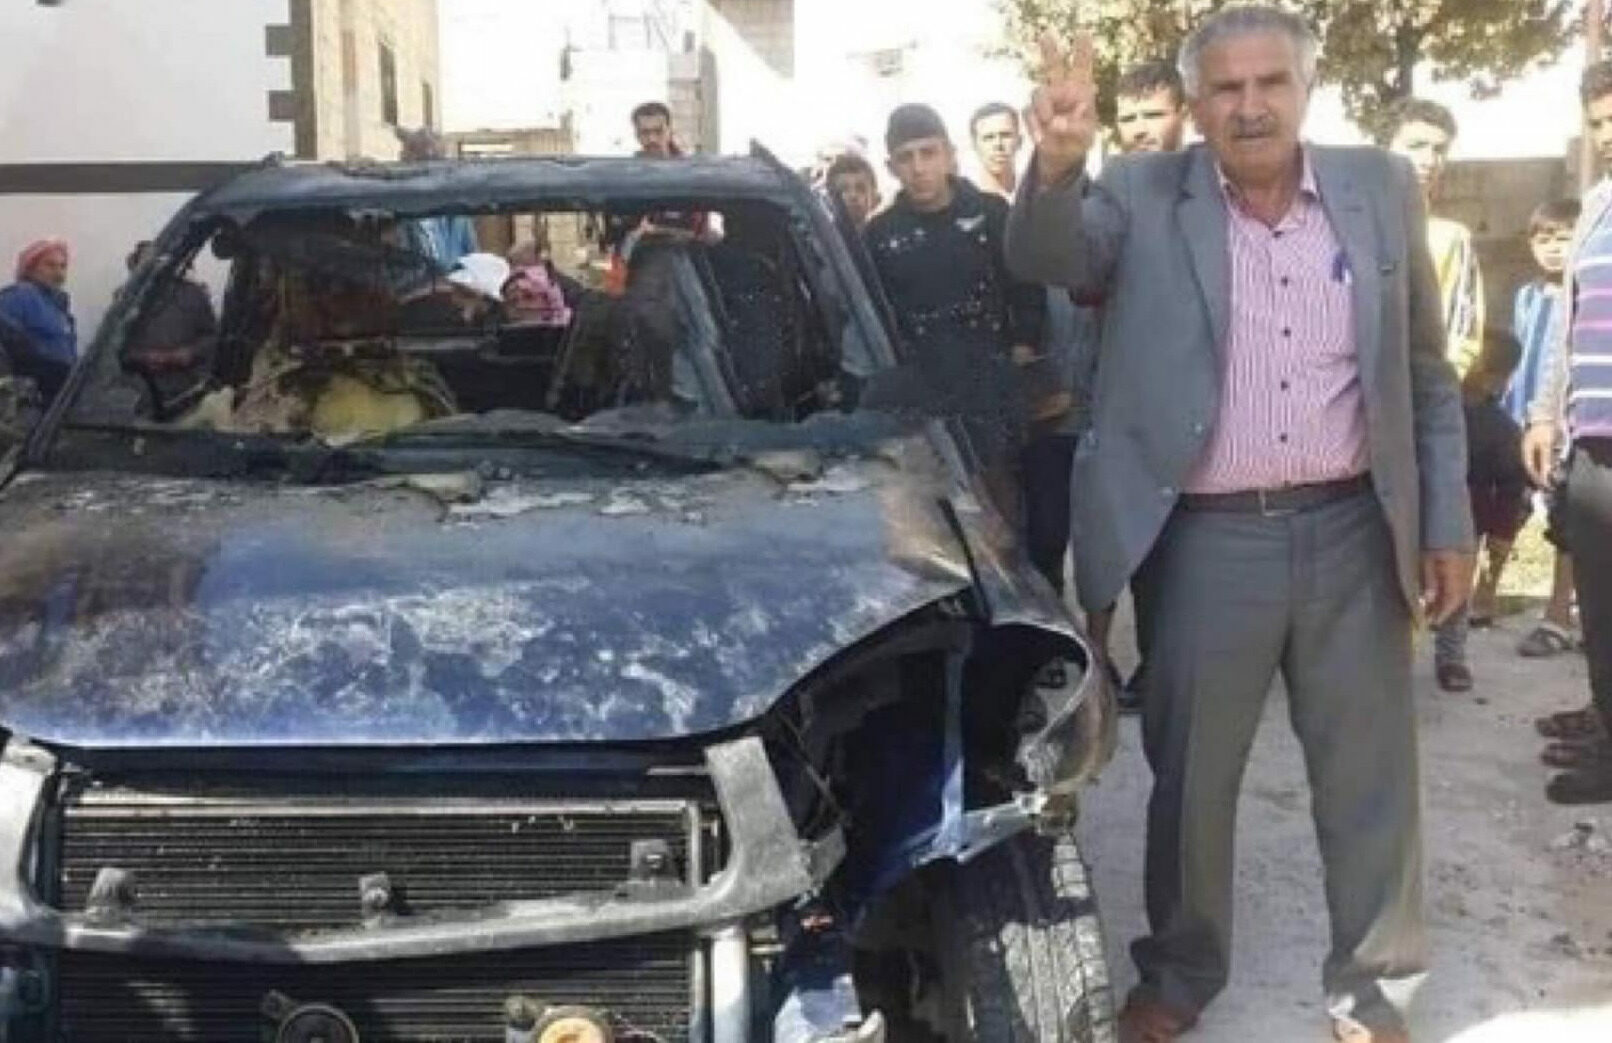 Cochairman Of Reconciliation Committee In Syria's Al-Quneitra Survives Assassination Attempt (Photos)